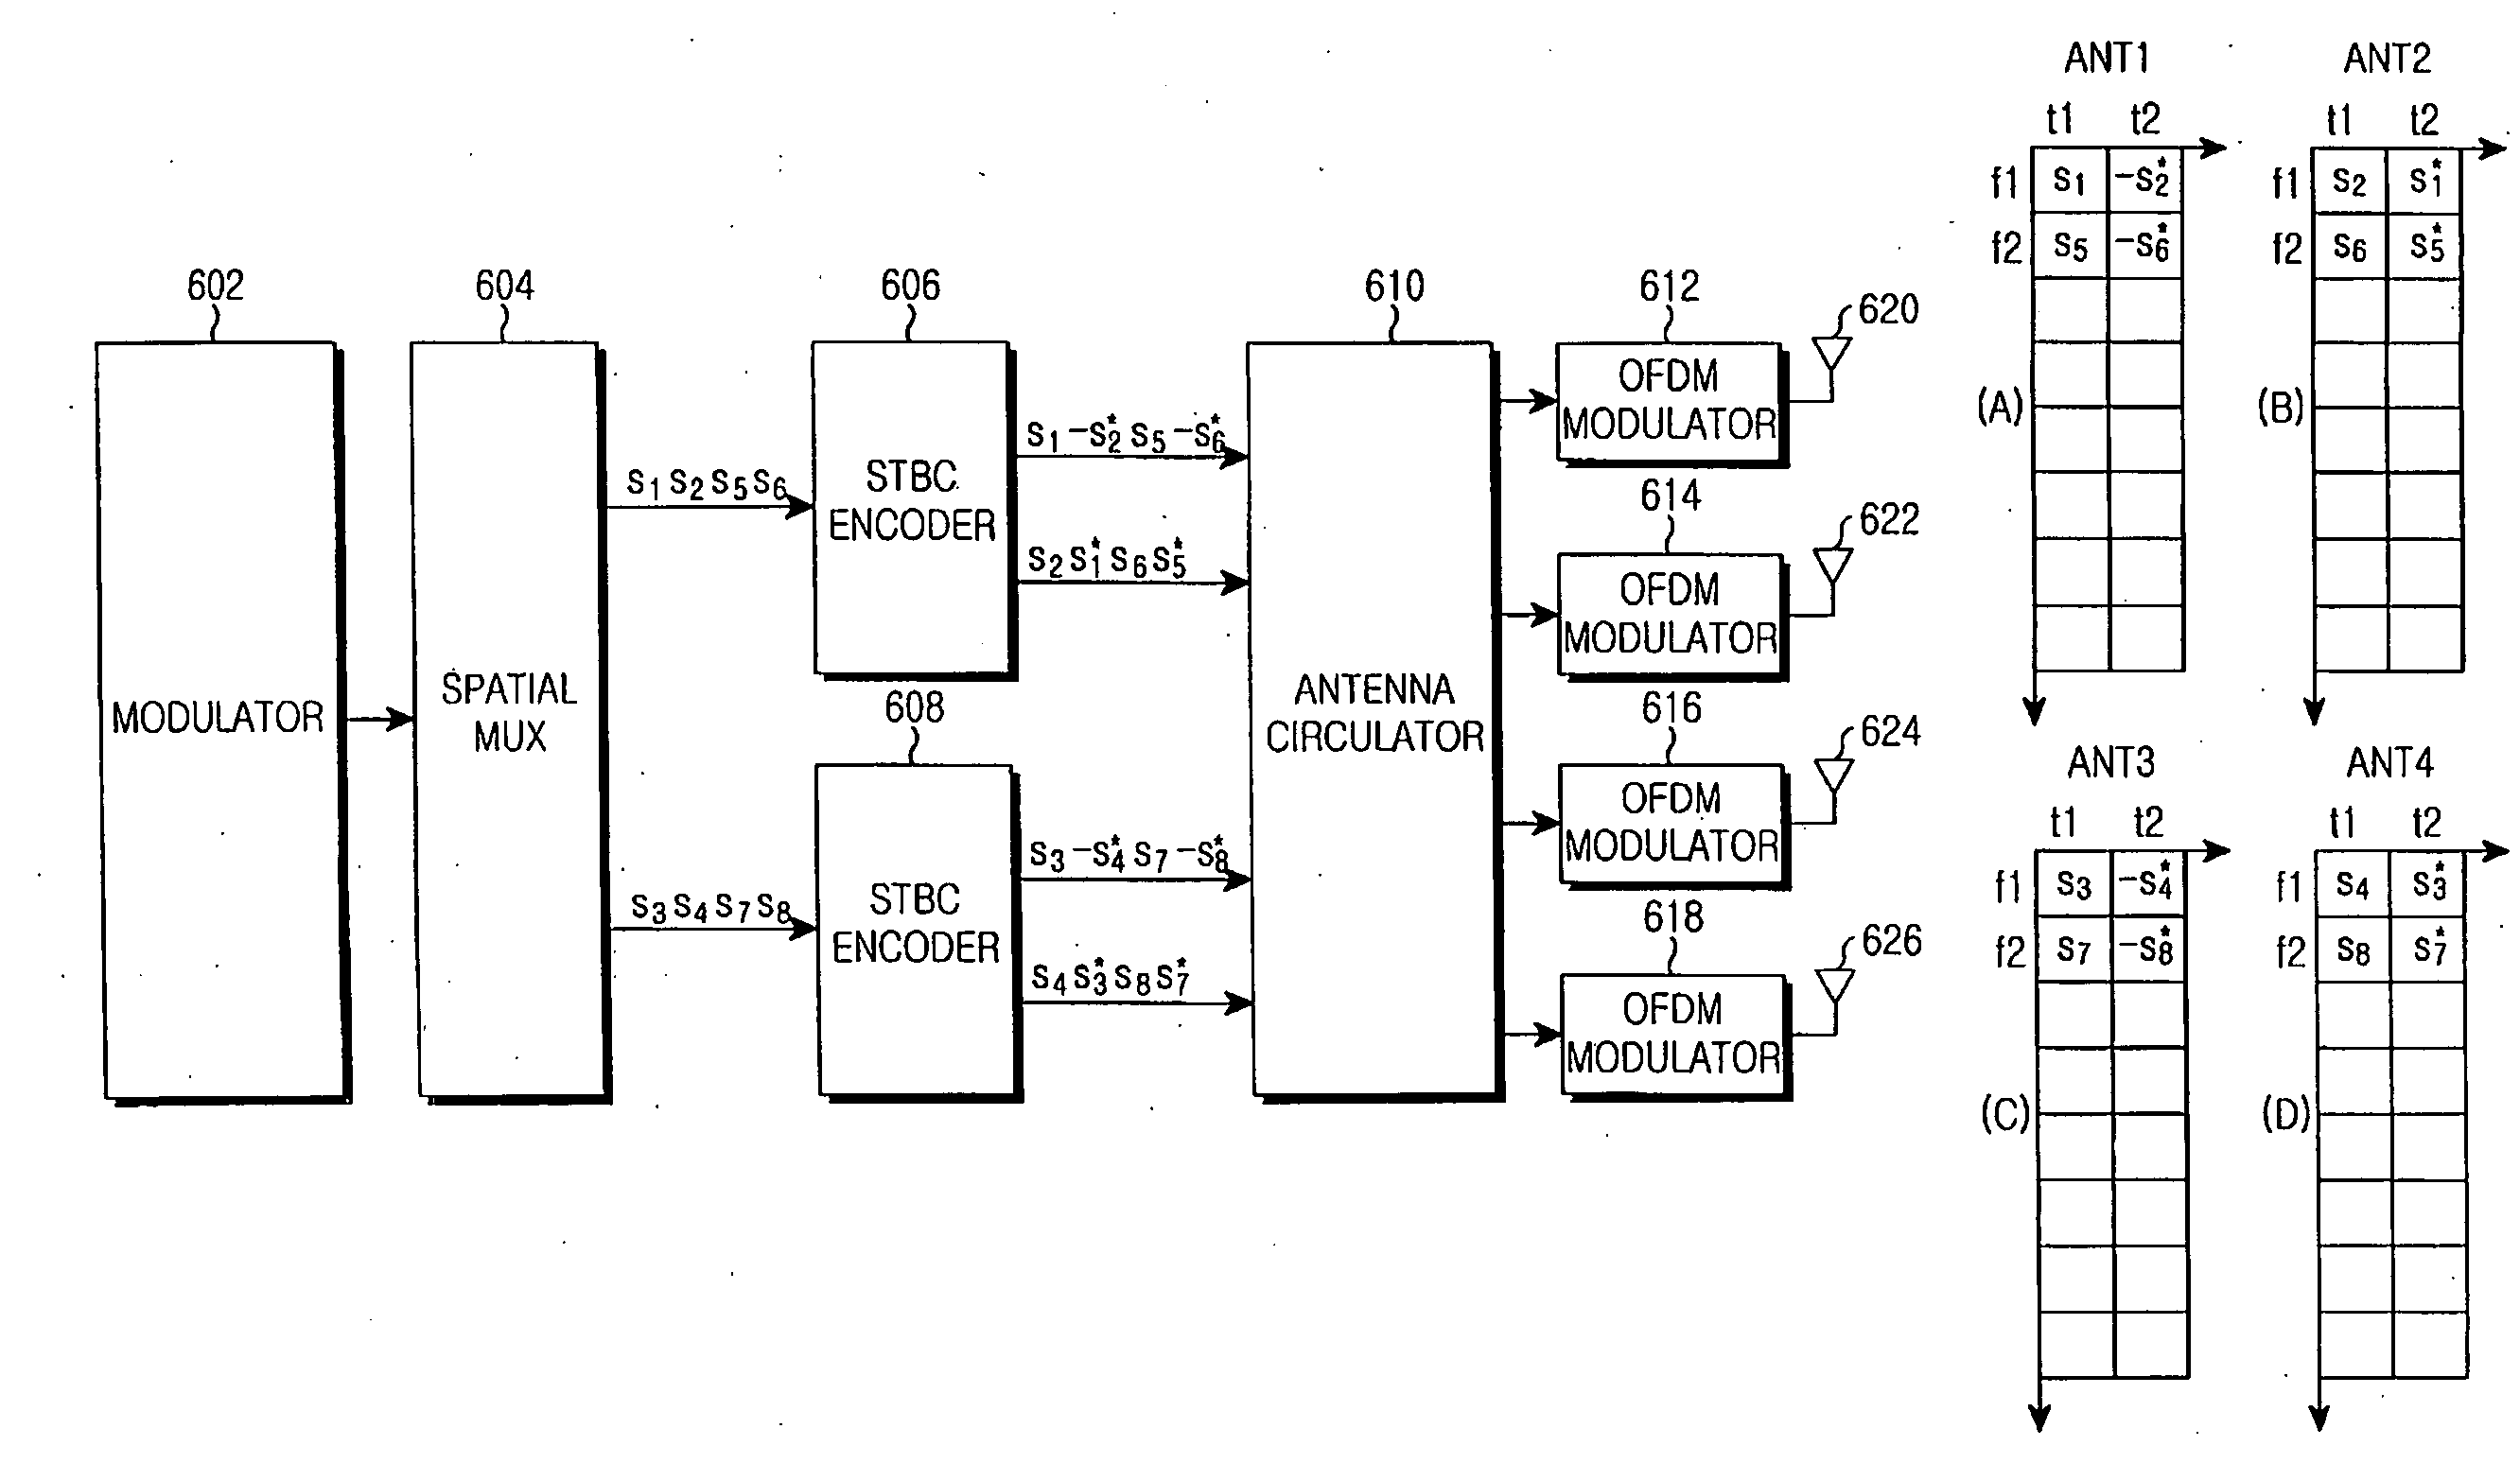 Apparatus and method for space-time frequency block coding in a wireless communication system